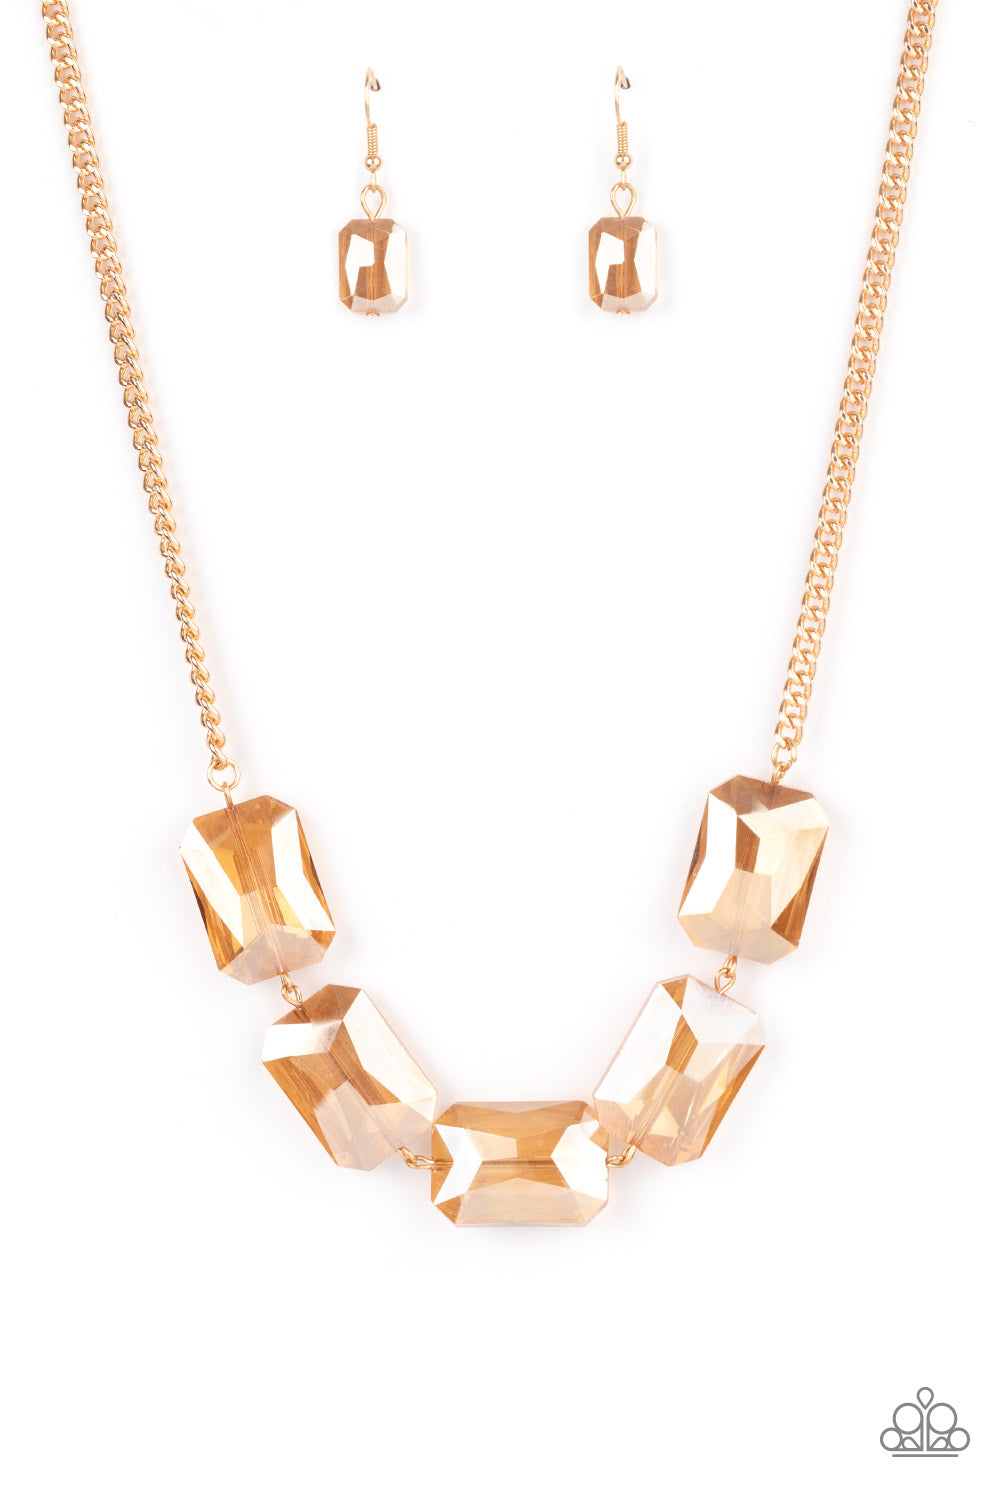 Heard It On The HEIR-Waves - gold - Paparazzi necklace